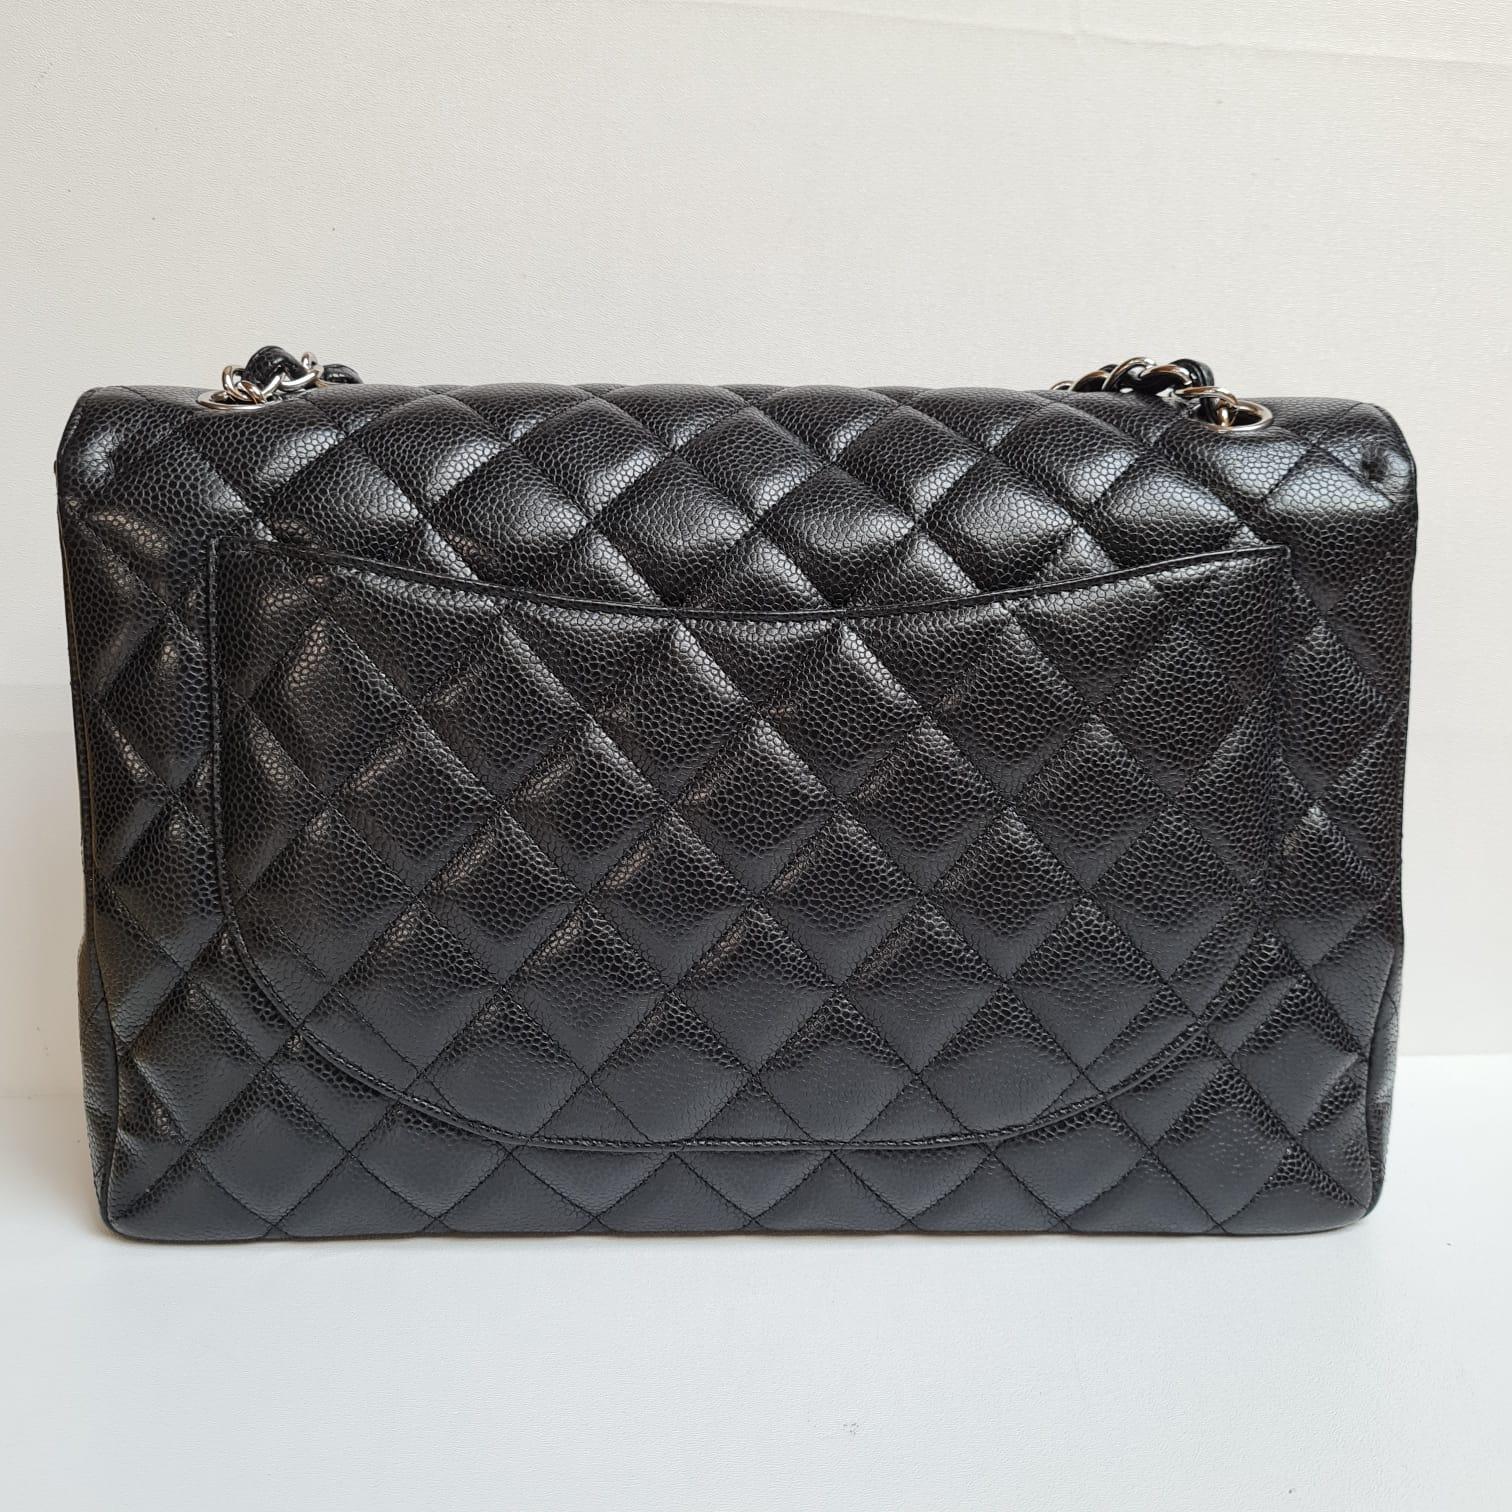 Chanel Black Maxi Caviar Leather Quilted Single Flap Bag In Good Condition In Jakarta, Daerah Khusus Ibukota Jakarta